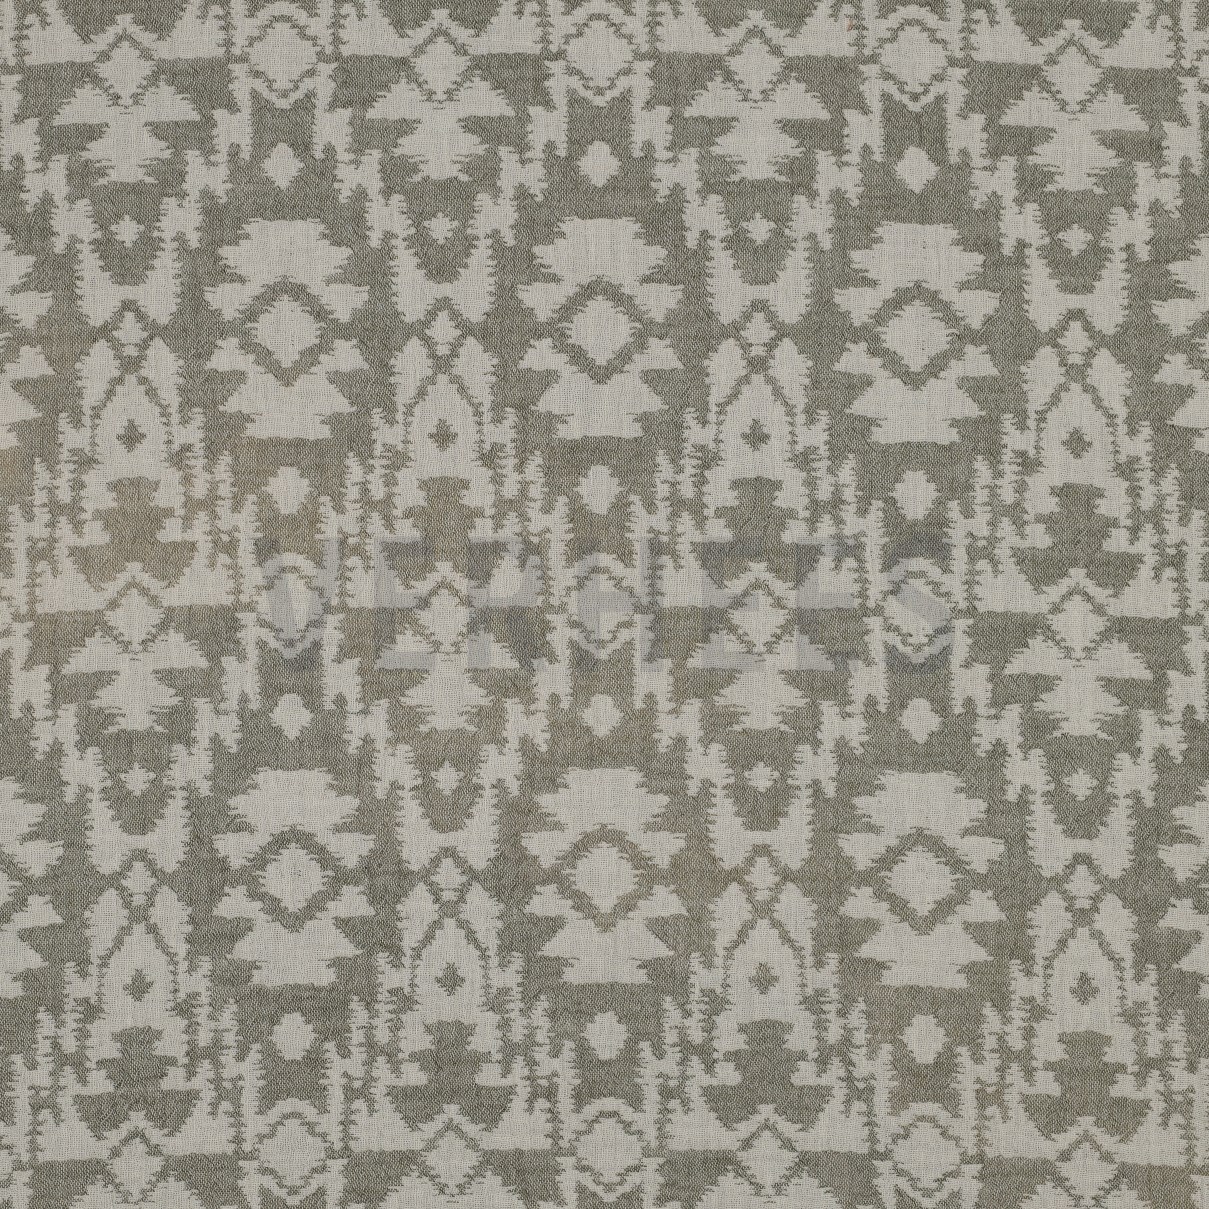 DOUBLE GAUZE JACQUARD AZTEC ARMY GREEN (high resolution)